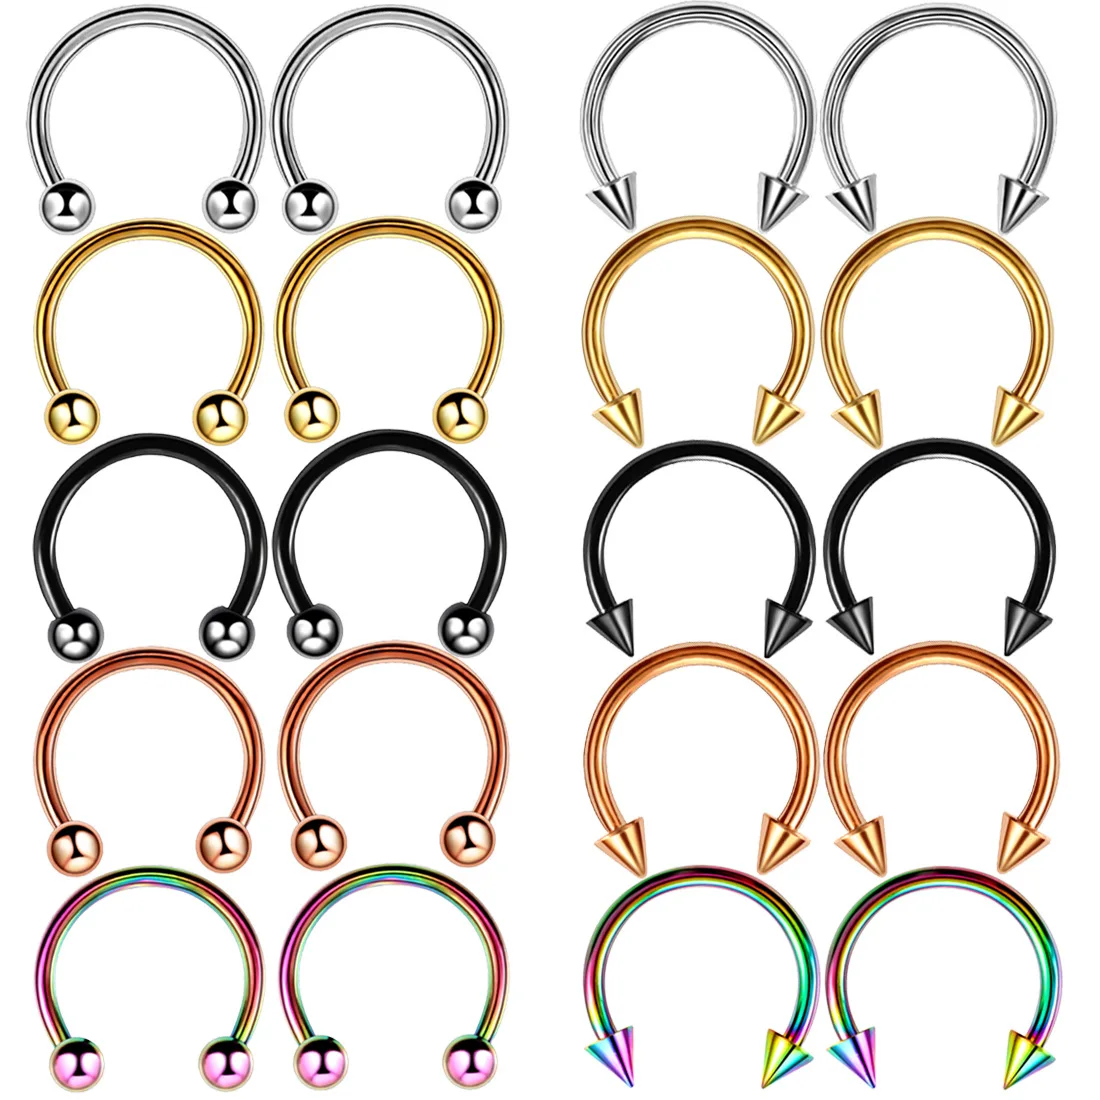 

Factory Nose Horseshoe Ring Nose Septum Ring 316L Stainless Steel Circular Piercing Ear Cartilage Tragus Body Jewelry Piercing, Picture